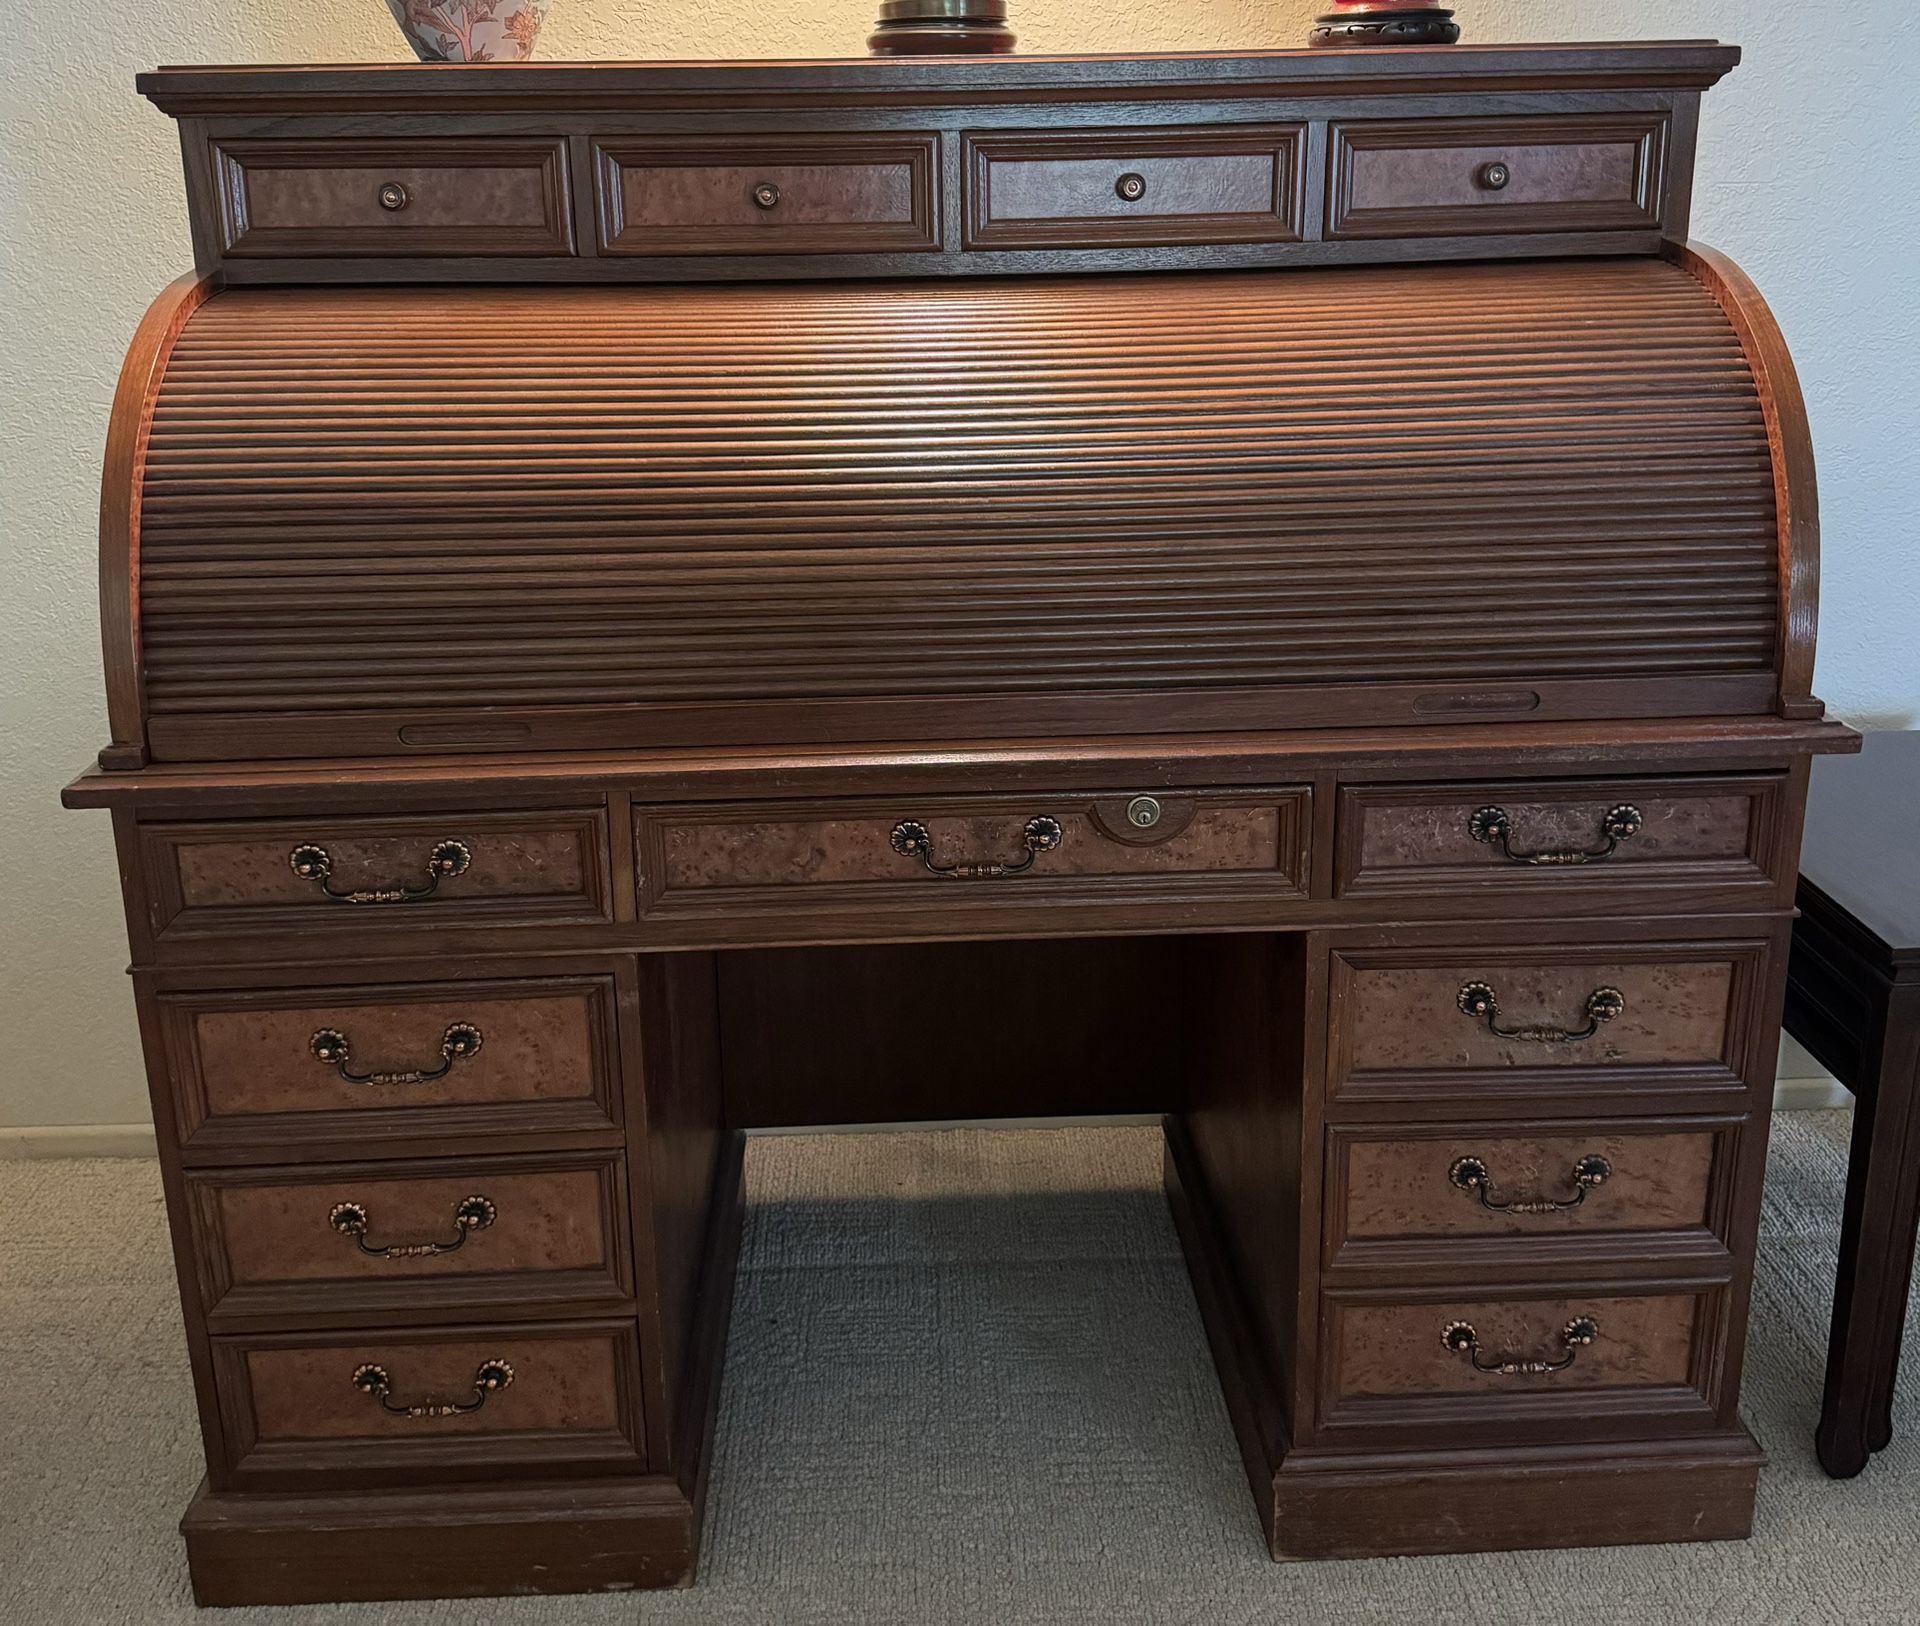 Gorgeous Roll Top Desk Moving Make An Offer!!